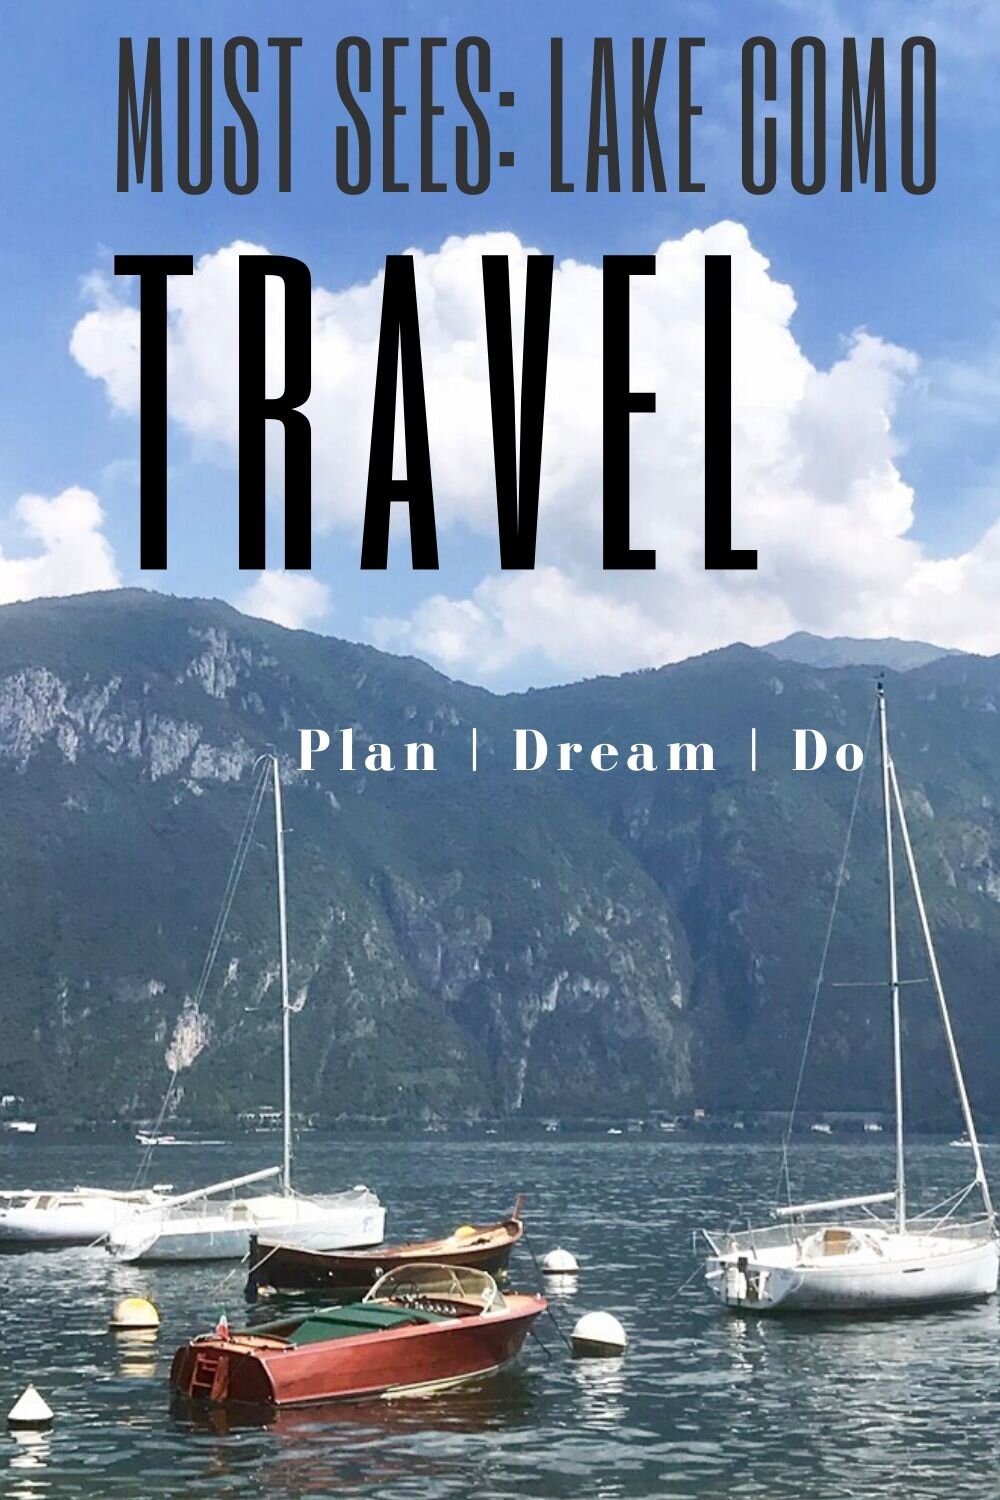 A complete travel guide to Lake Como. Everything to do, eat, and where to stay in Lake Como, along with info on how to do a day trip there from Milan. There are so many amazing things to do in Lake Como